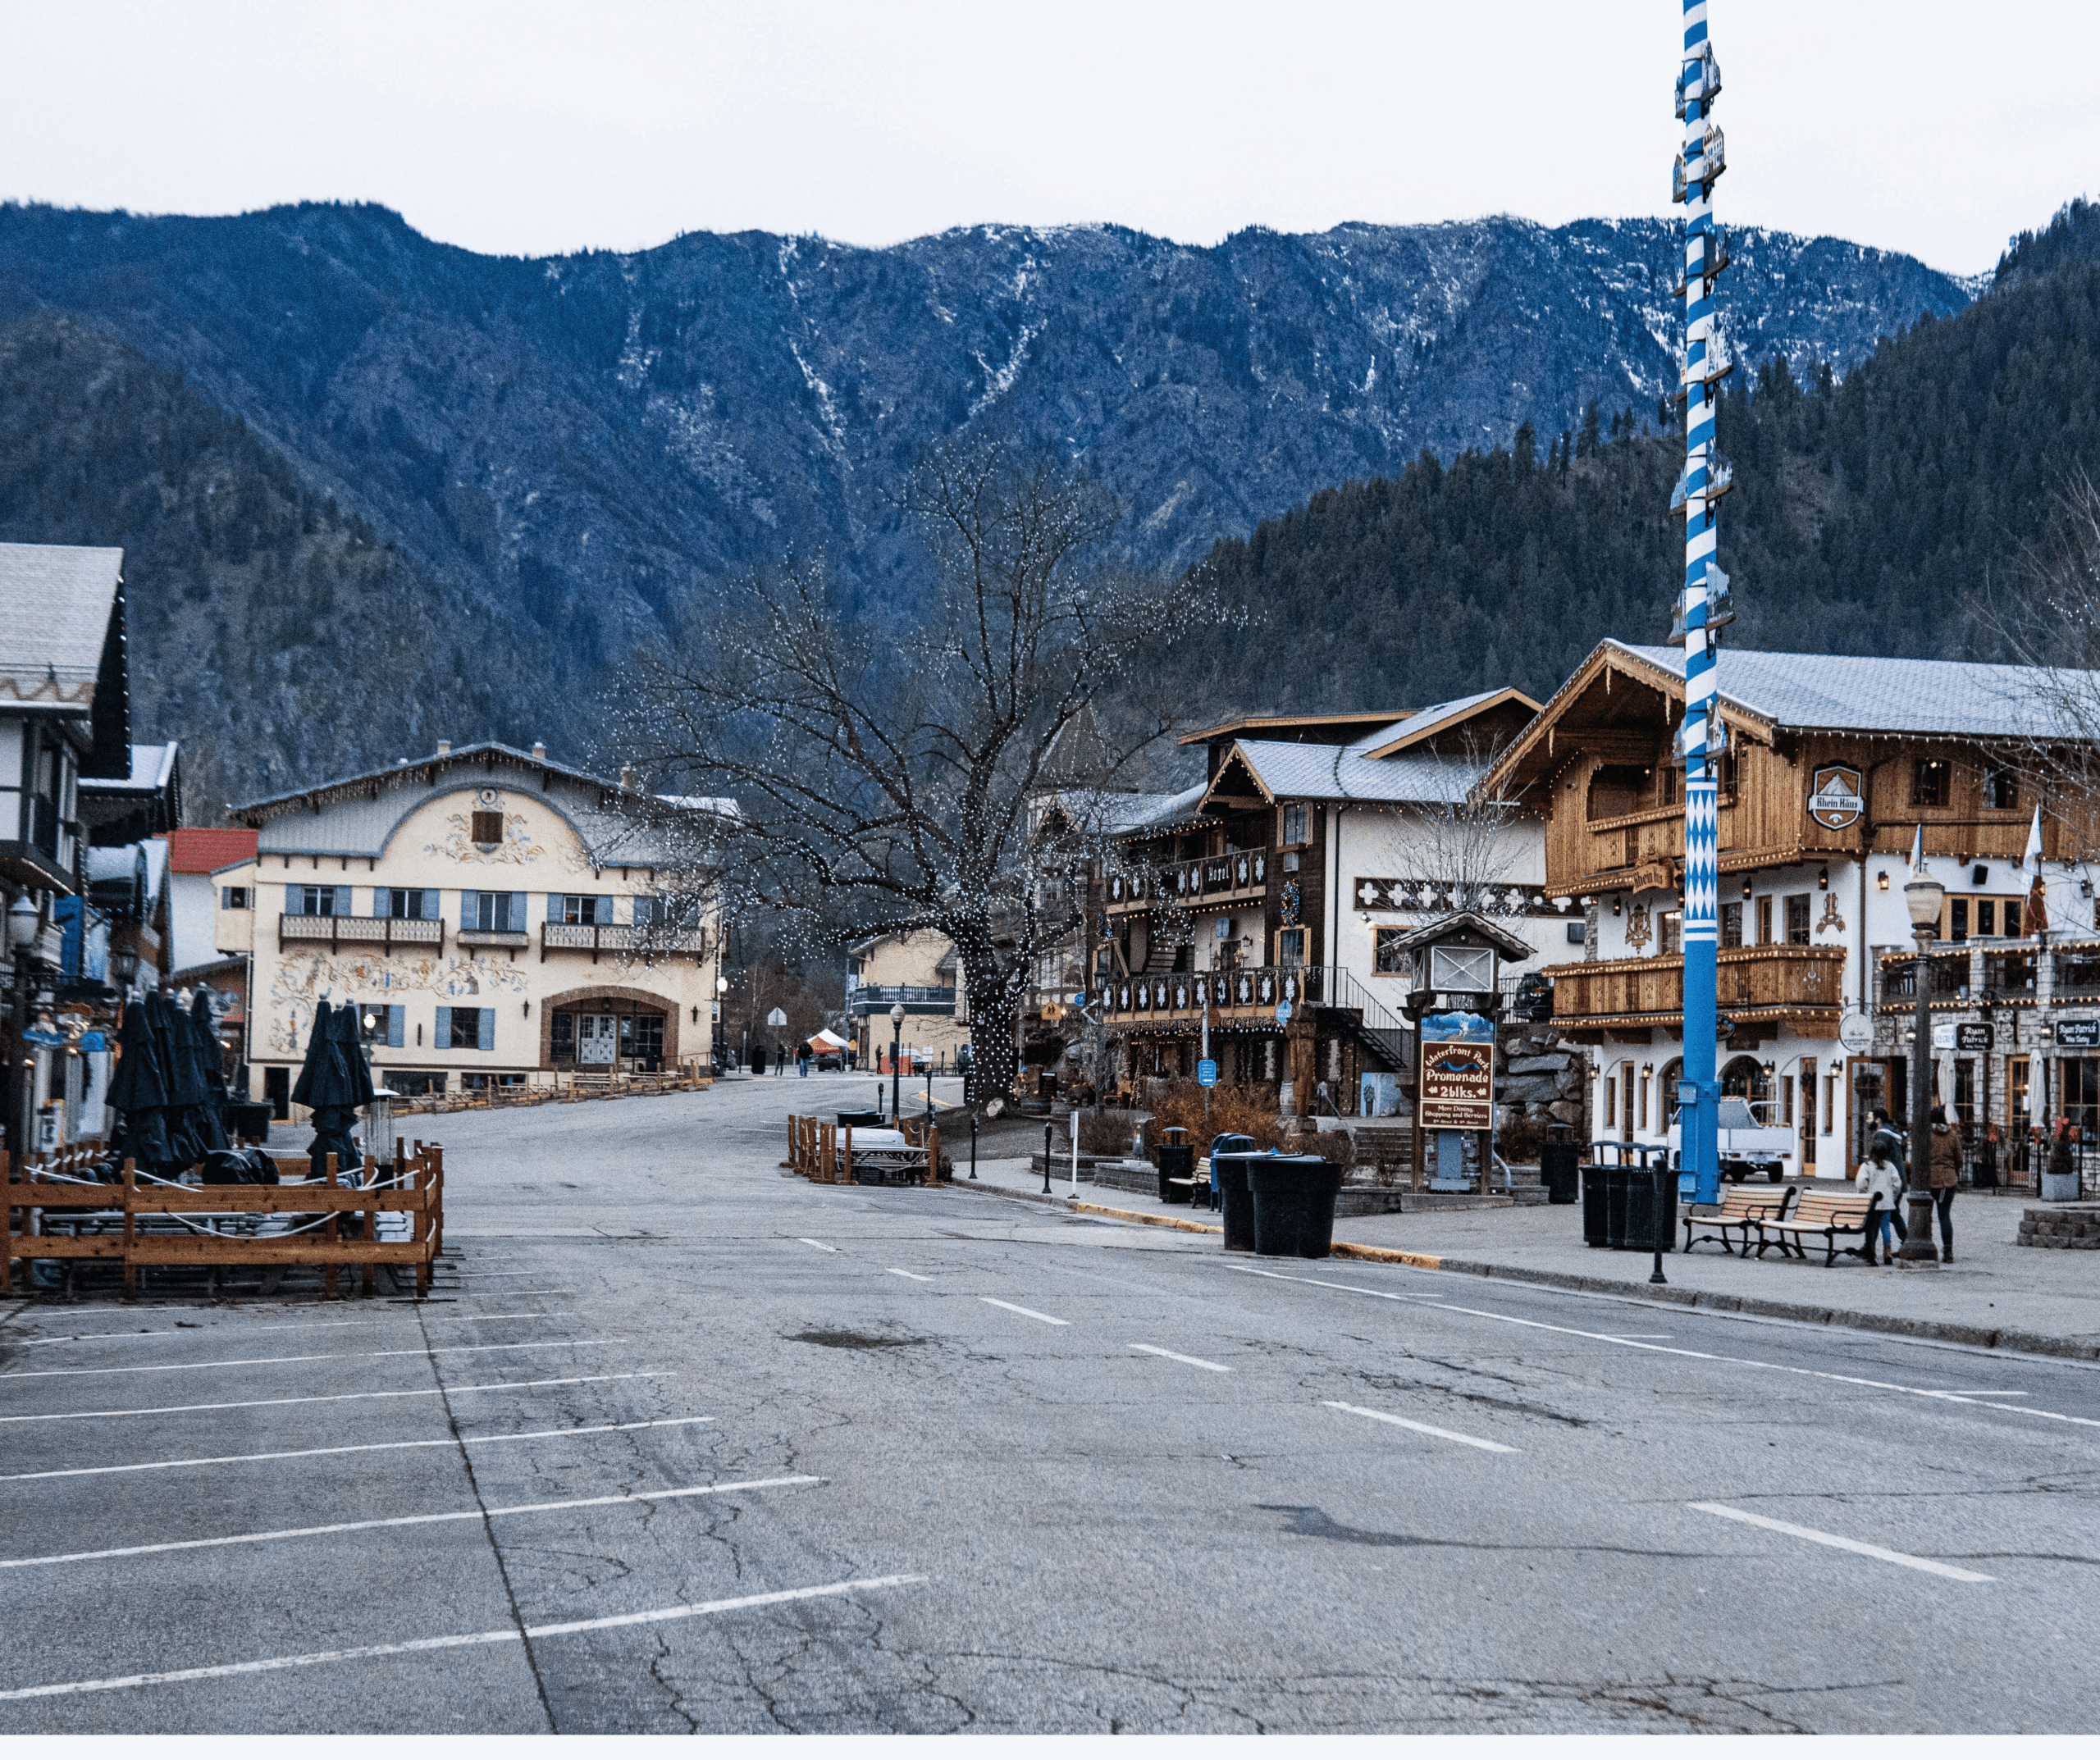 9 Festive Things to do in Leavenworth, WA: Washington State's Premier Christmas Town - Clumsy Girl Travels